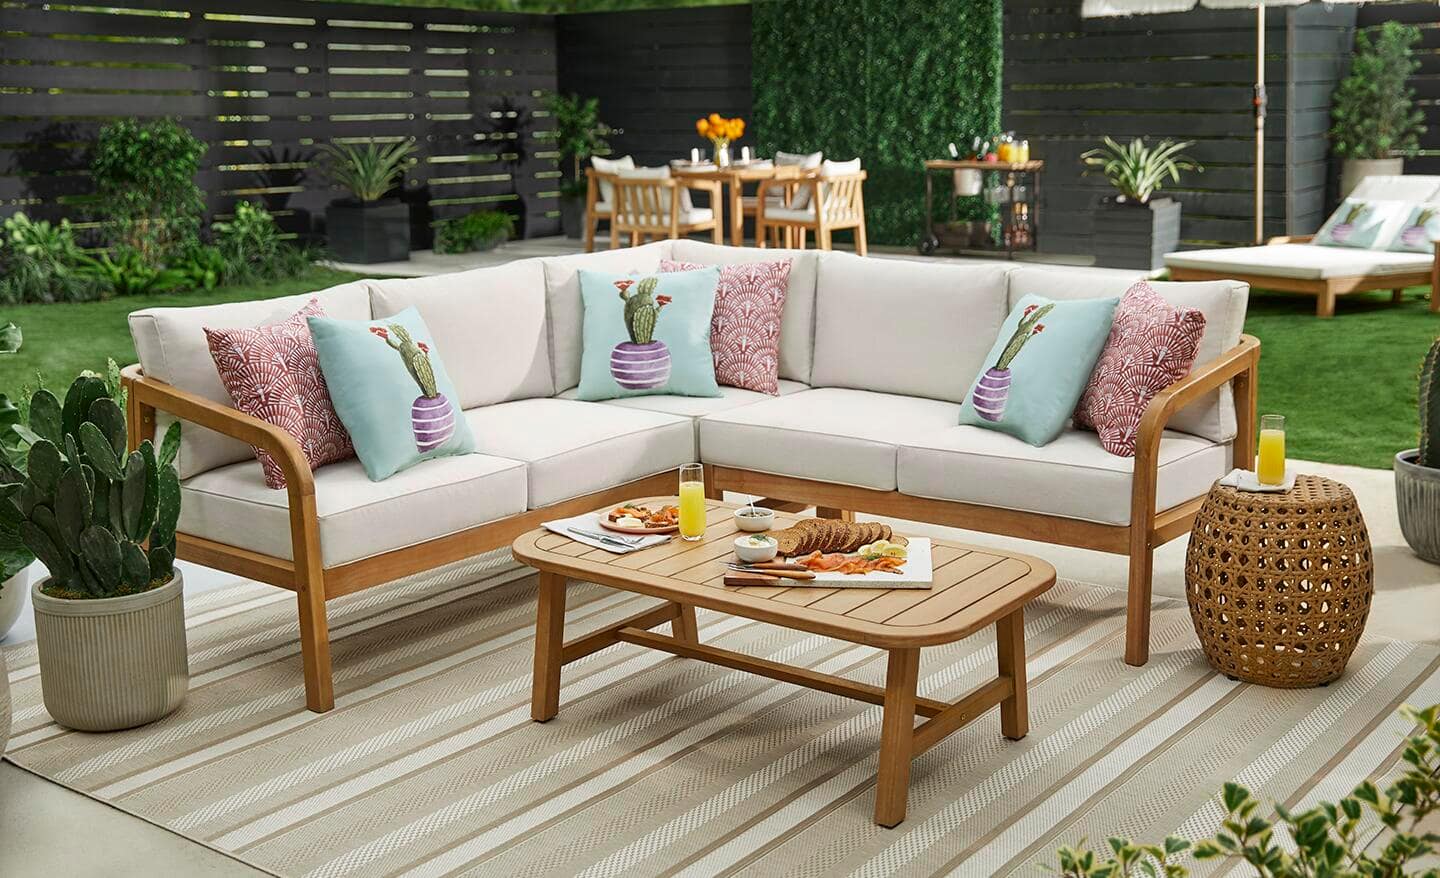 Wooden sectional sofa with off-white cushions and decorative pillows on a patio.